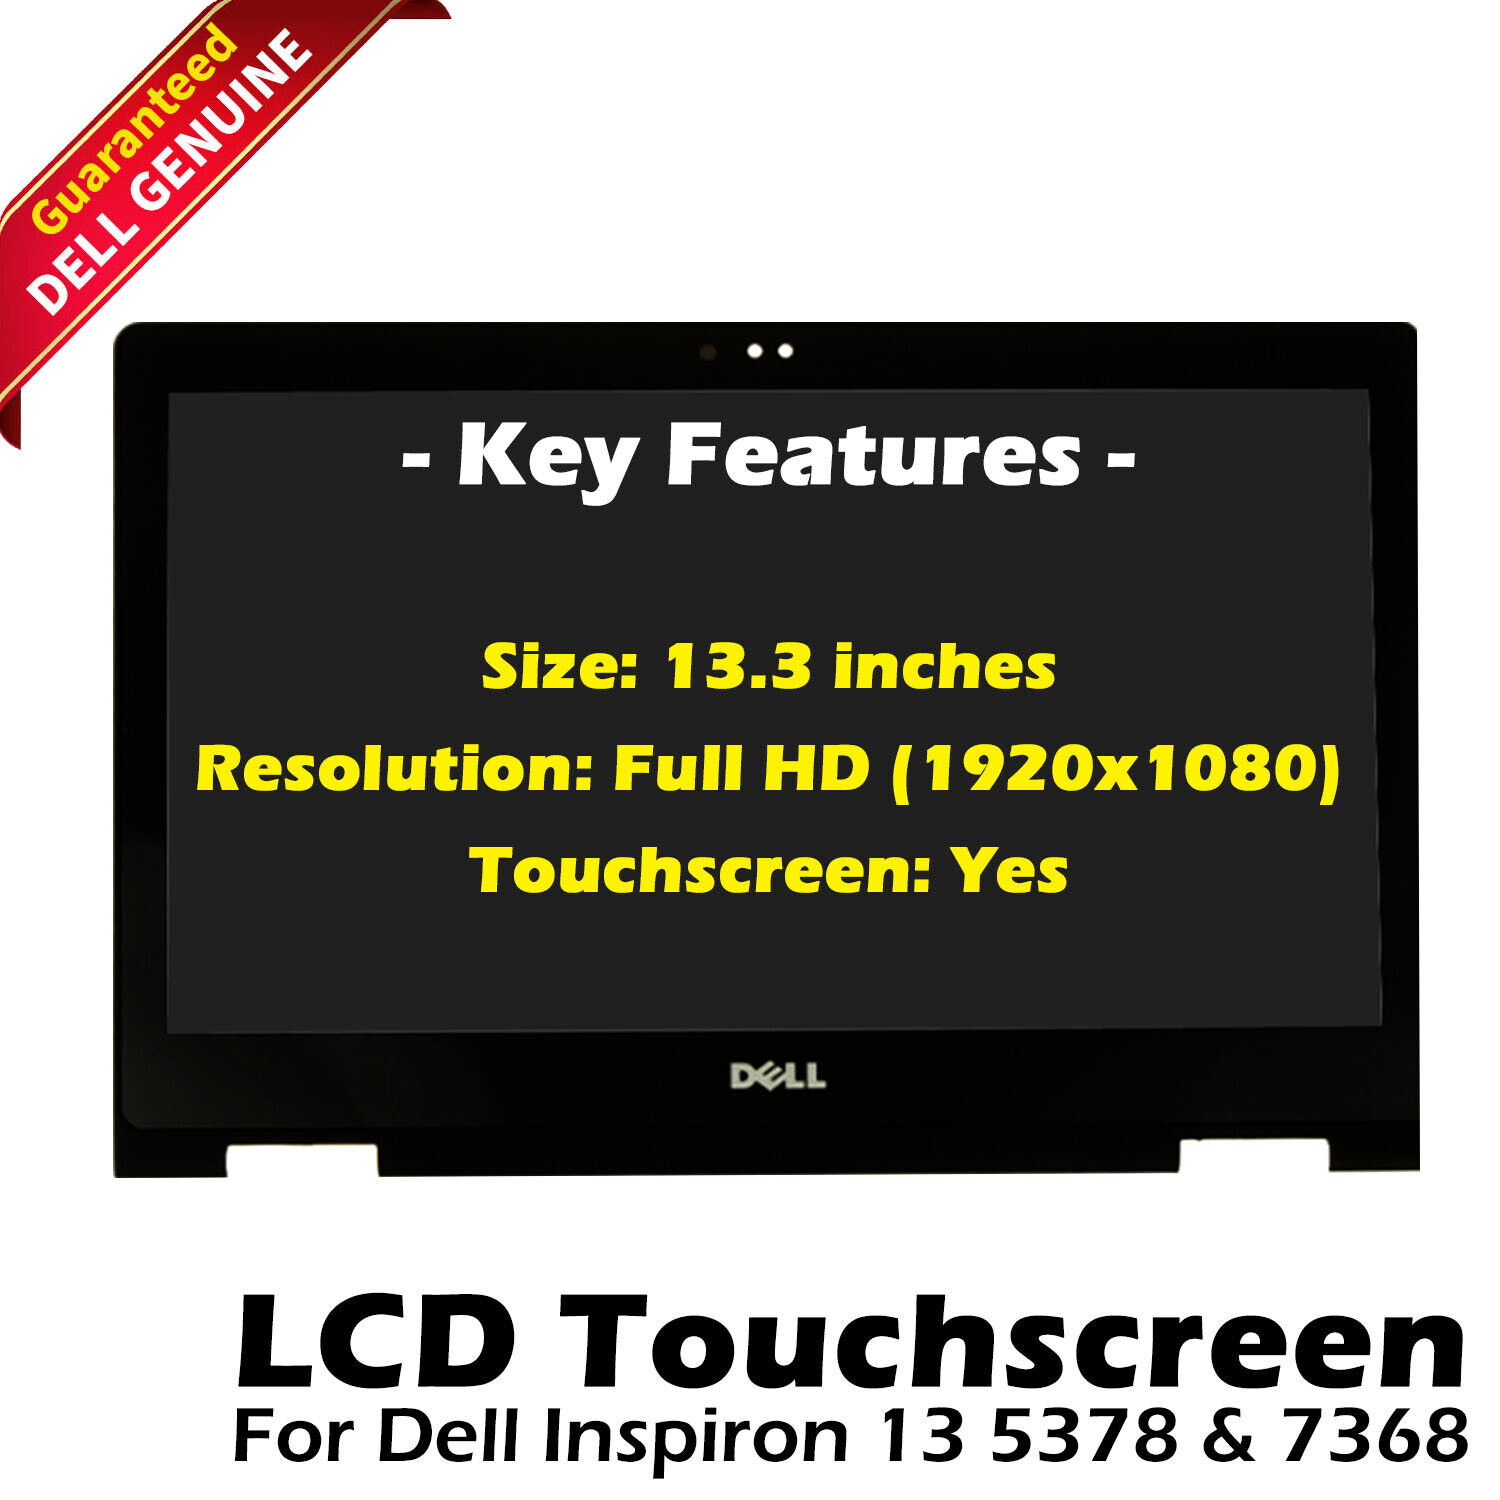 Dell Inspiron 13 5378 & 7368 13.3 Touchscreen FHD LCD LED Widescreen 2CTCN 4F5HT